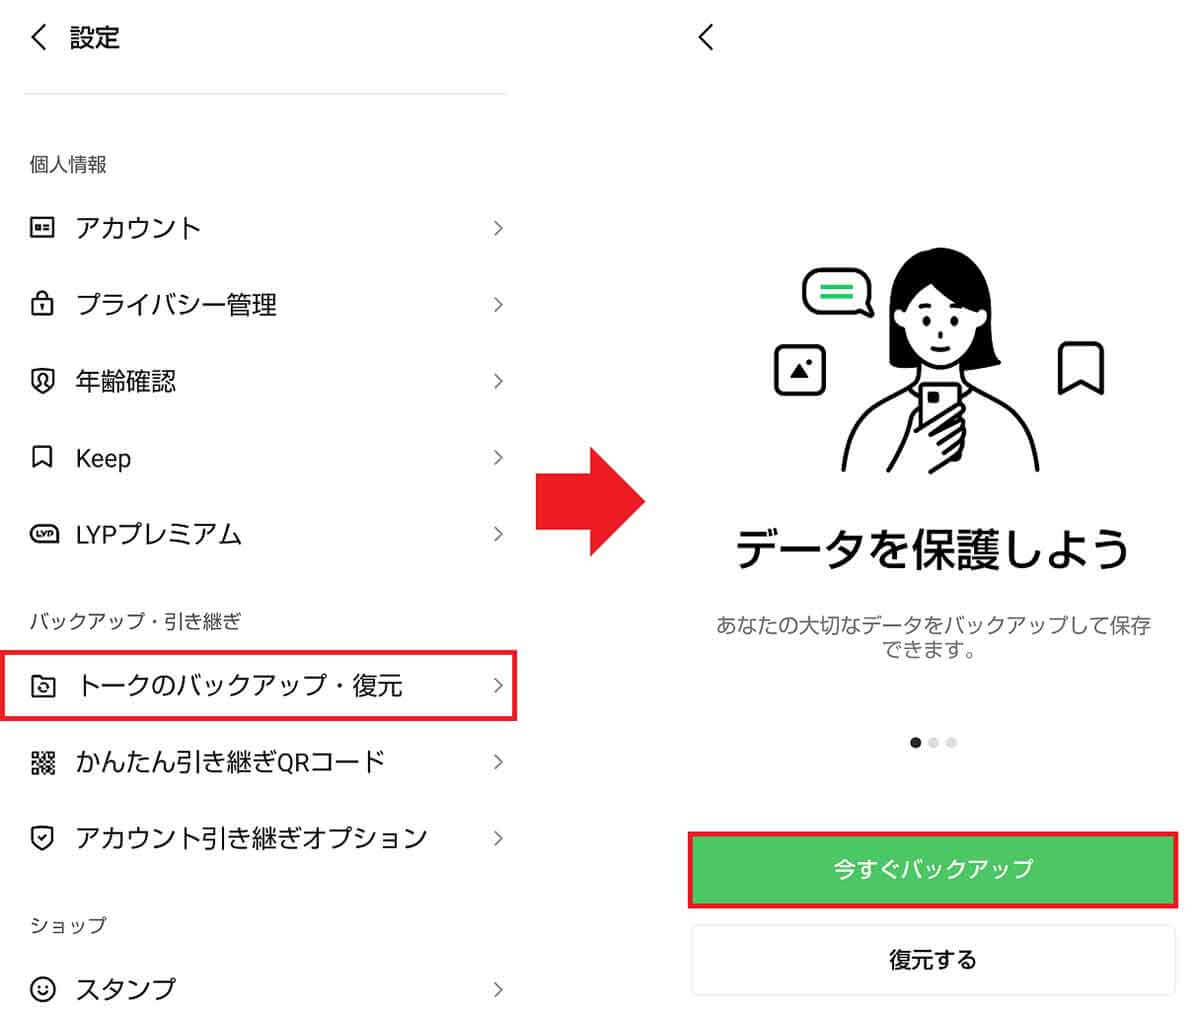 LINEは古いスマホでトーク履歴をバックアップ1